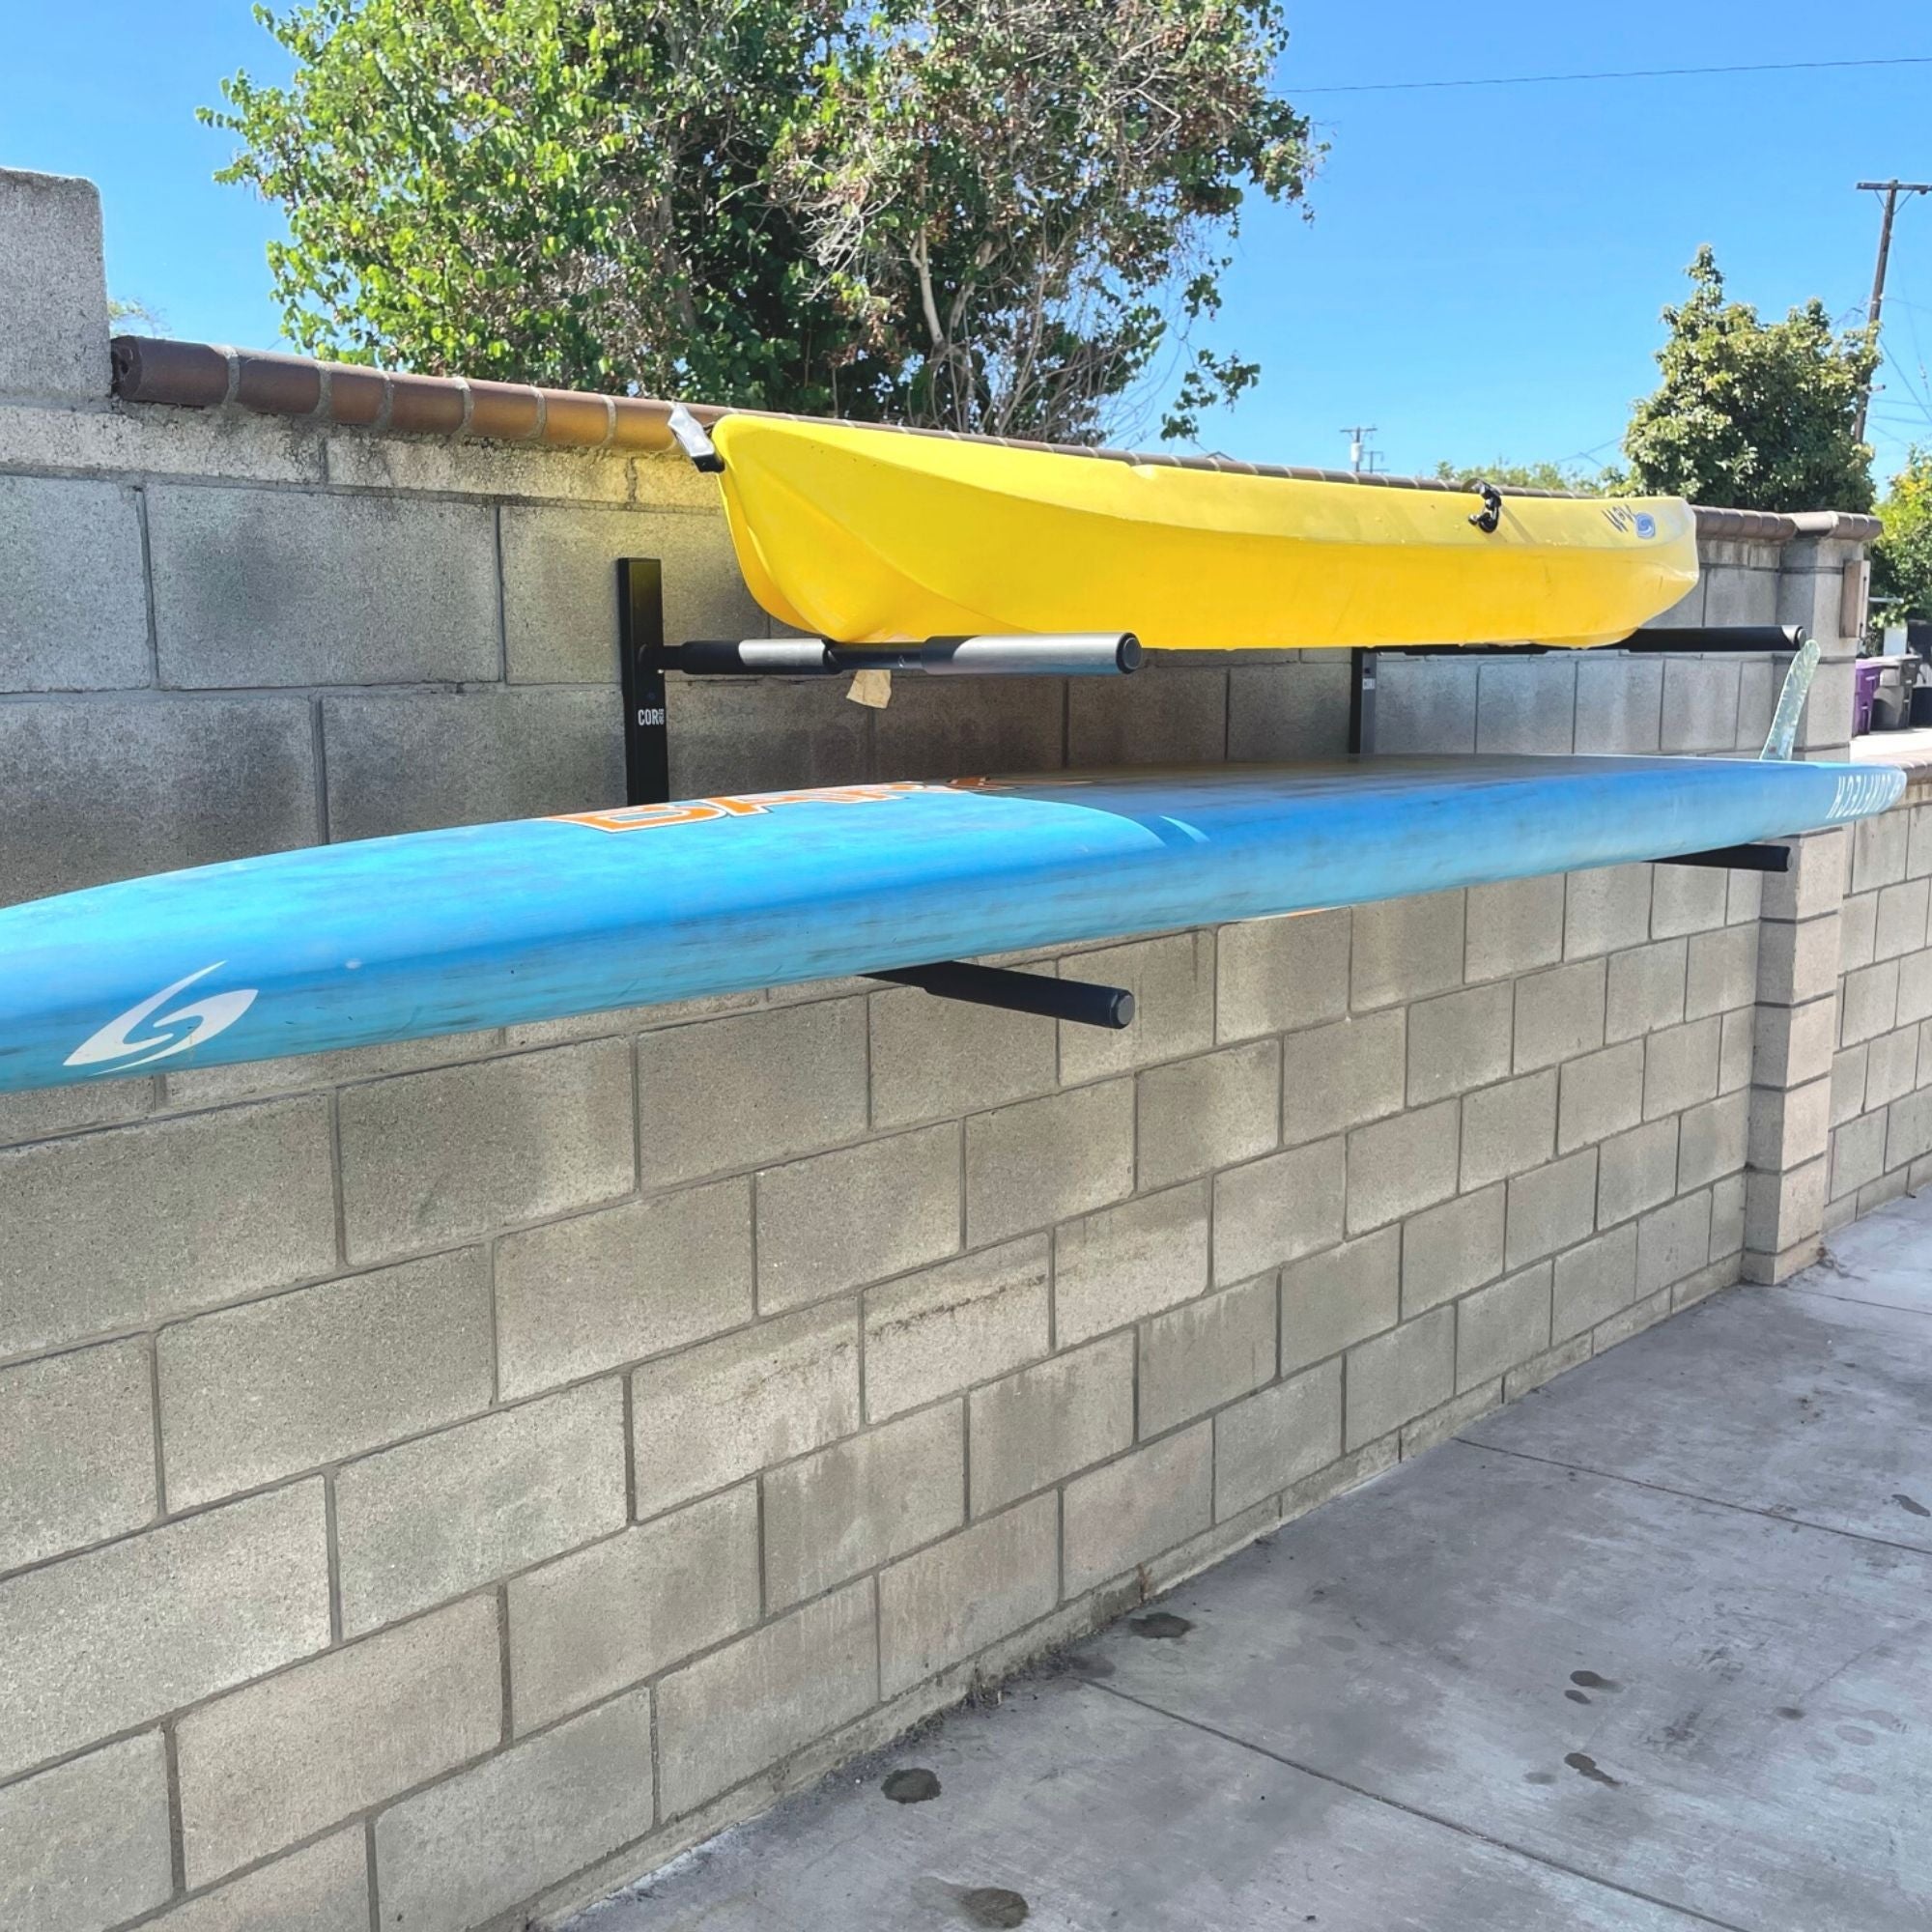 paddleboard wall mount double rack sup